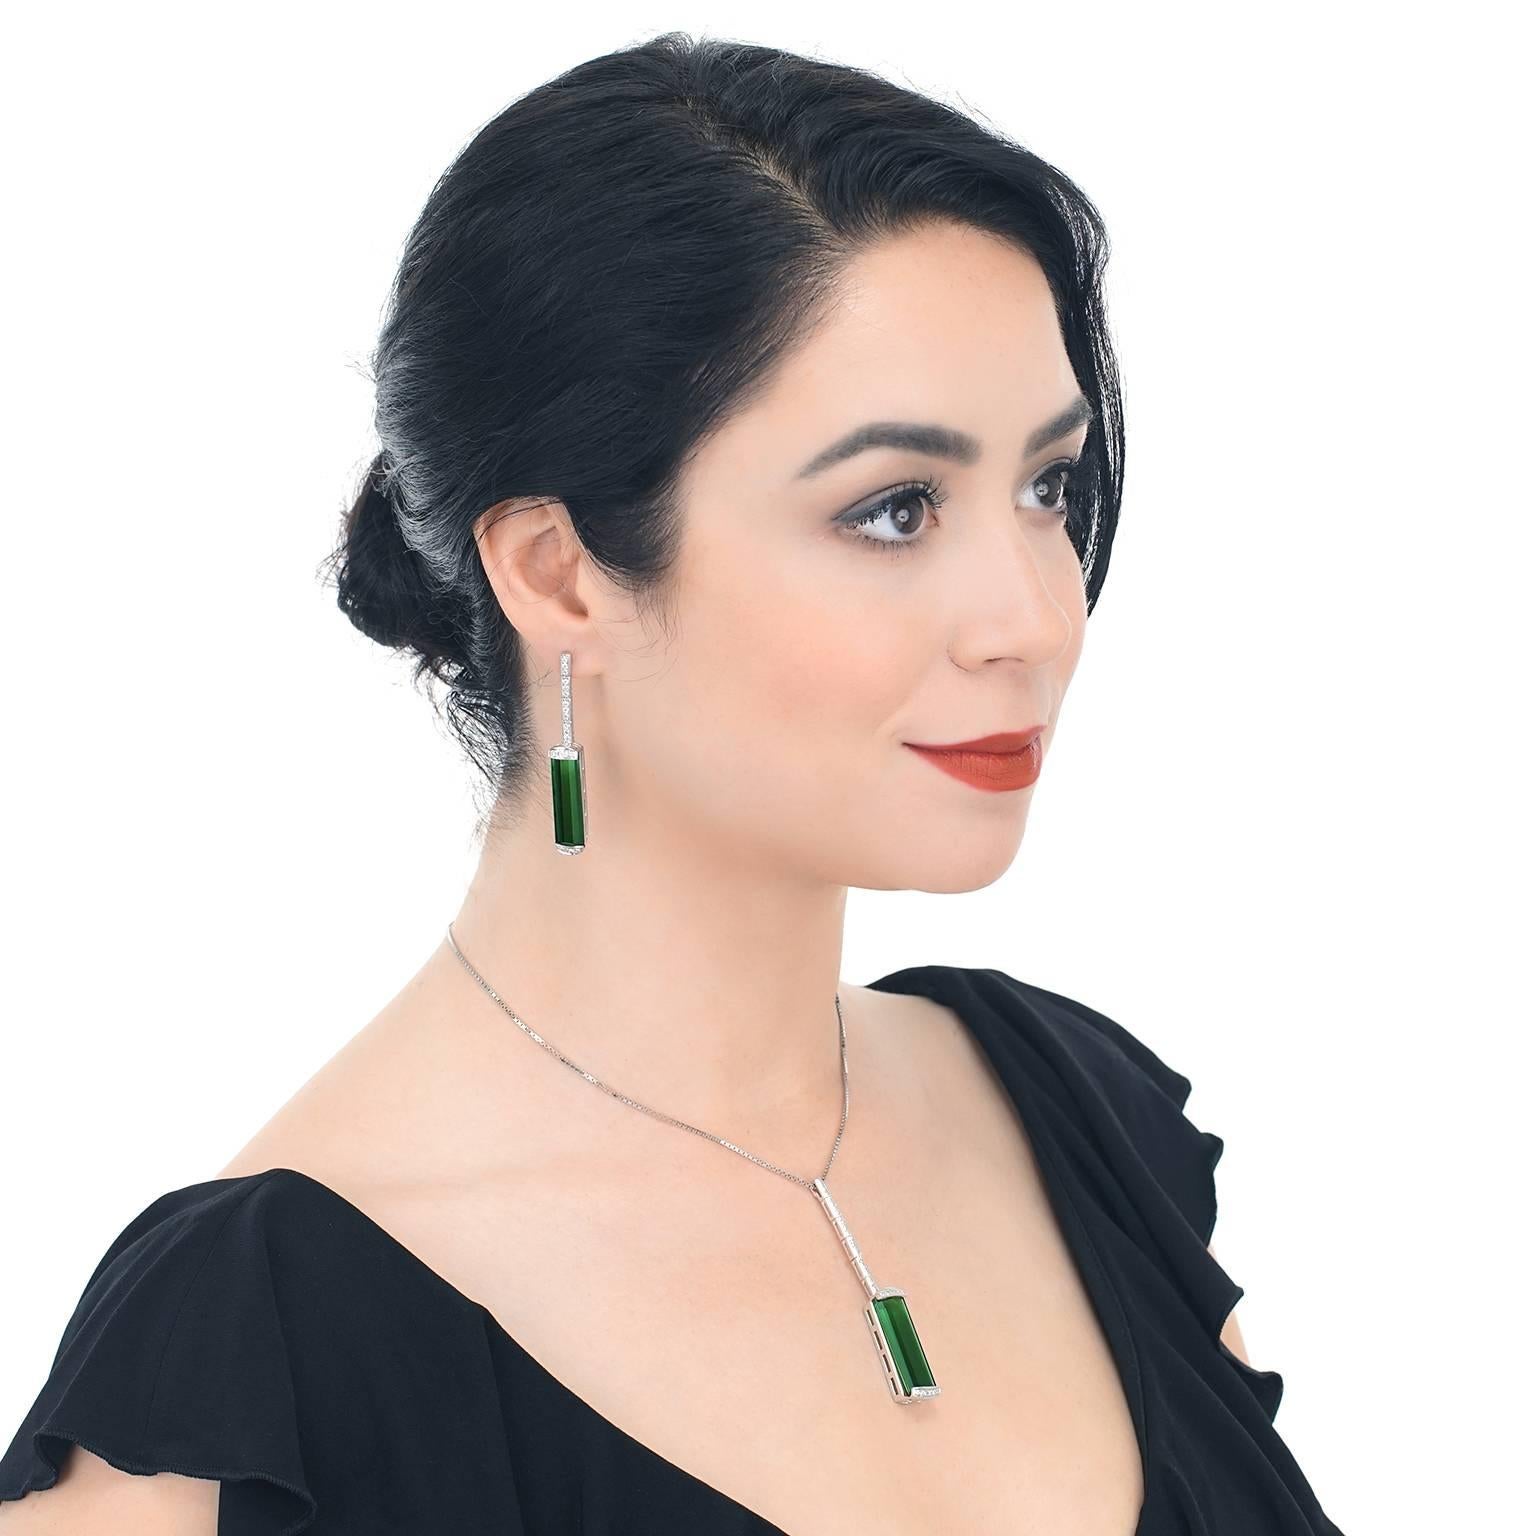 Circa 1980s, 18k.  A vivid column of liquid green pours from a fall of brilliant white diamonds in these quintessentially modern earrings. Underscoring the elegant minimalist design with lush color and white flashes is 29.0 carats of superb